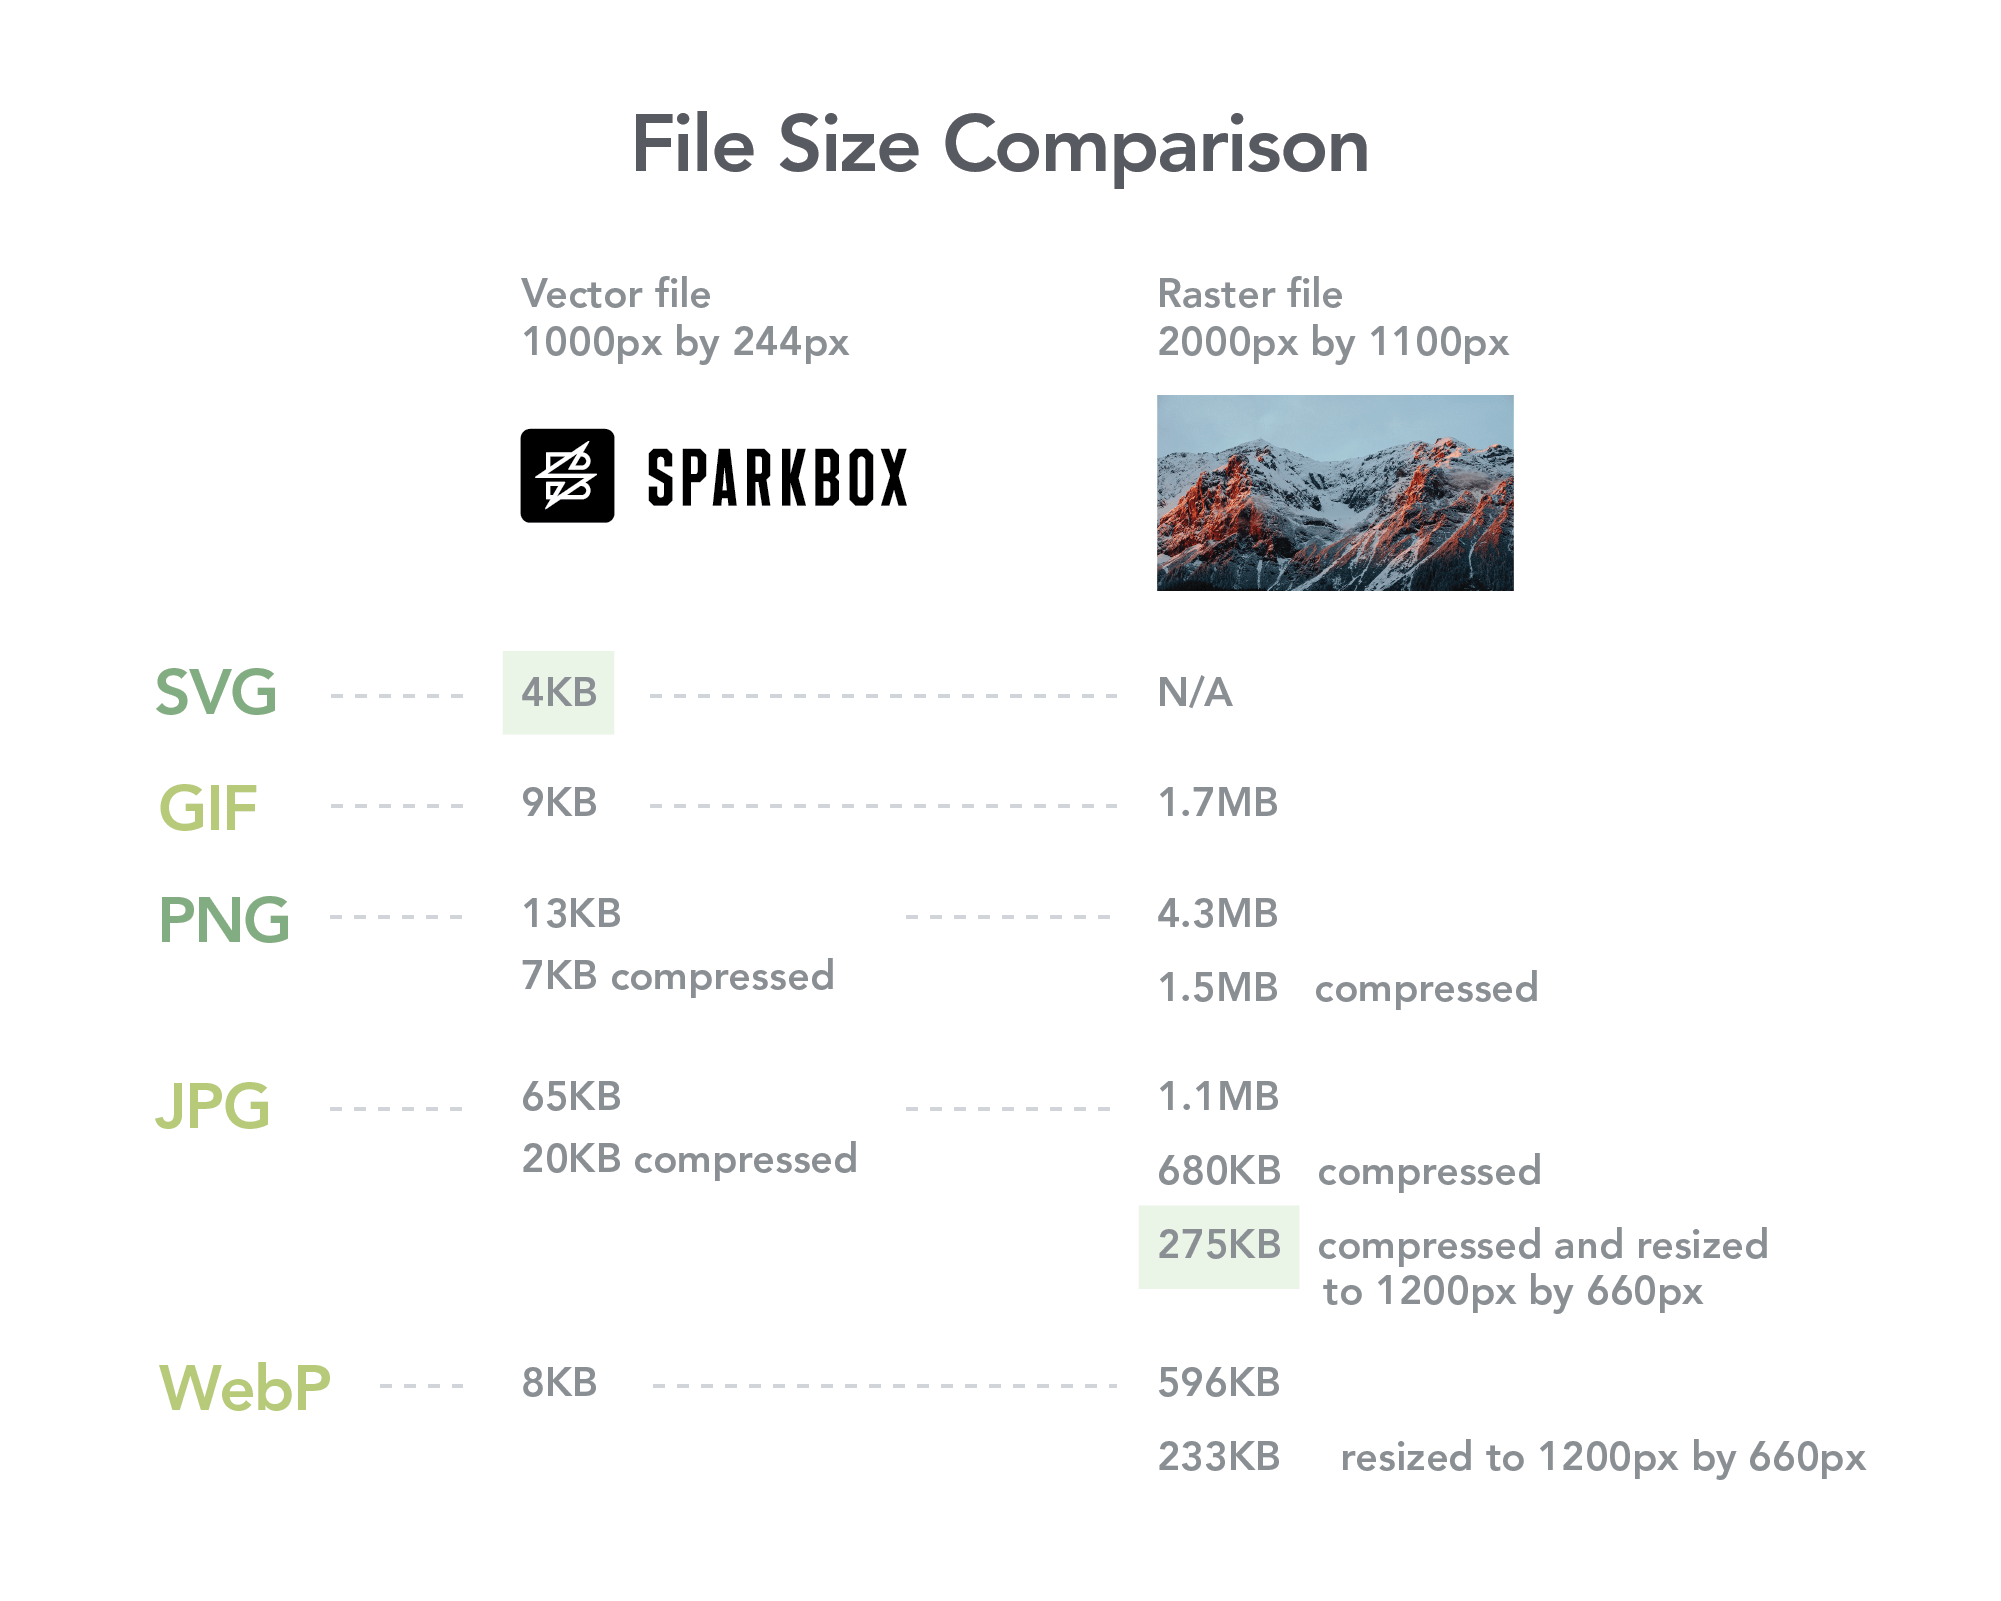 A comparison of file sizes that shows how SVGs are best for vector art and JPGs are best for images